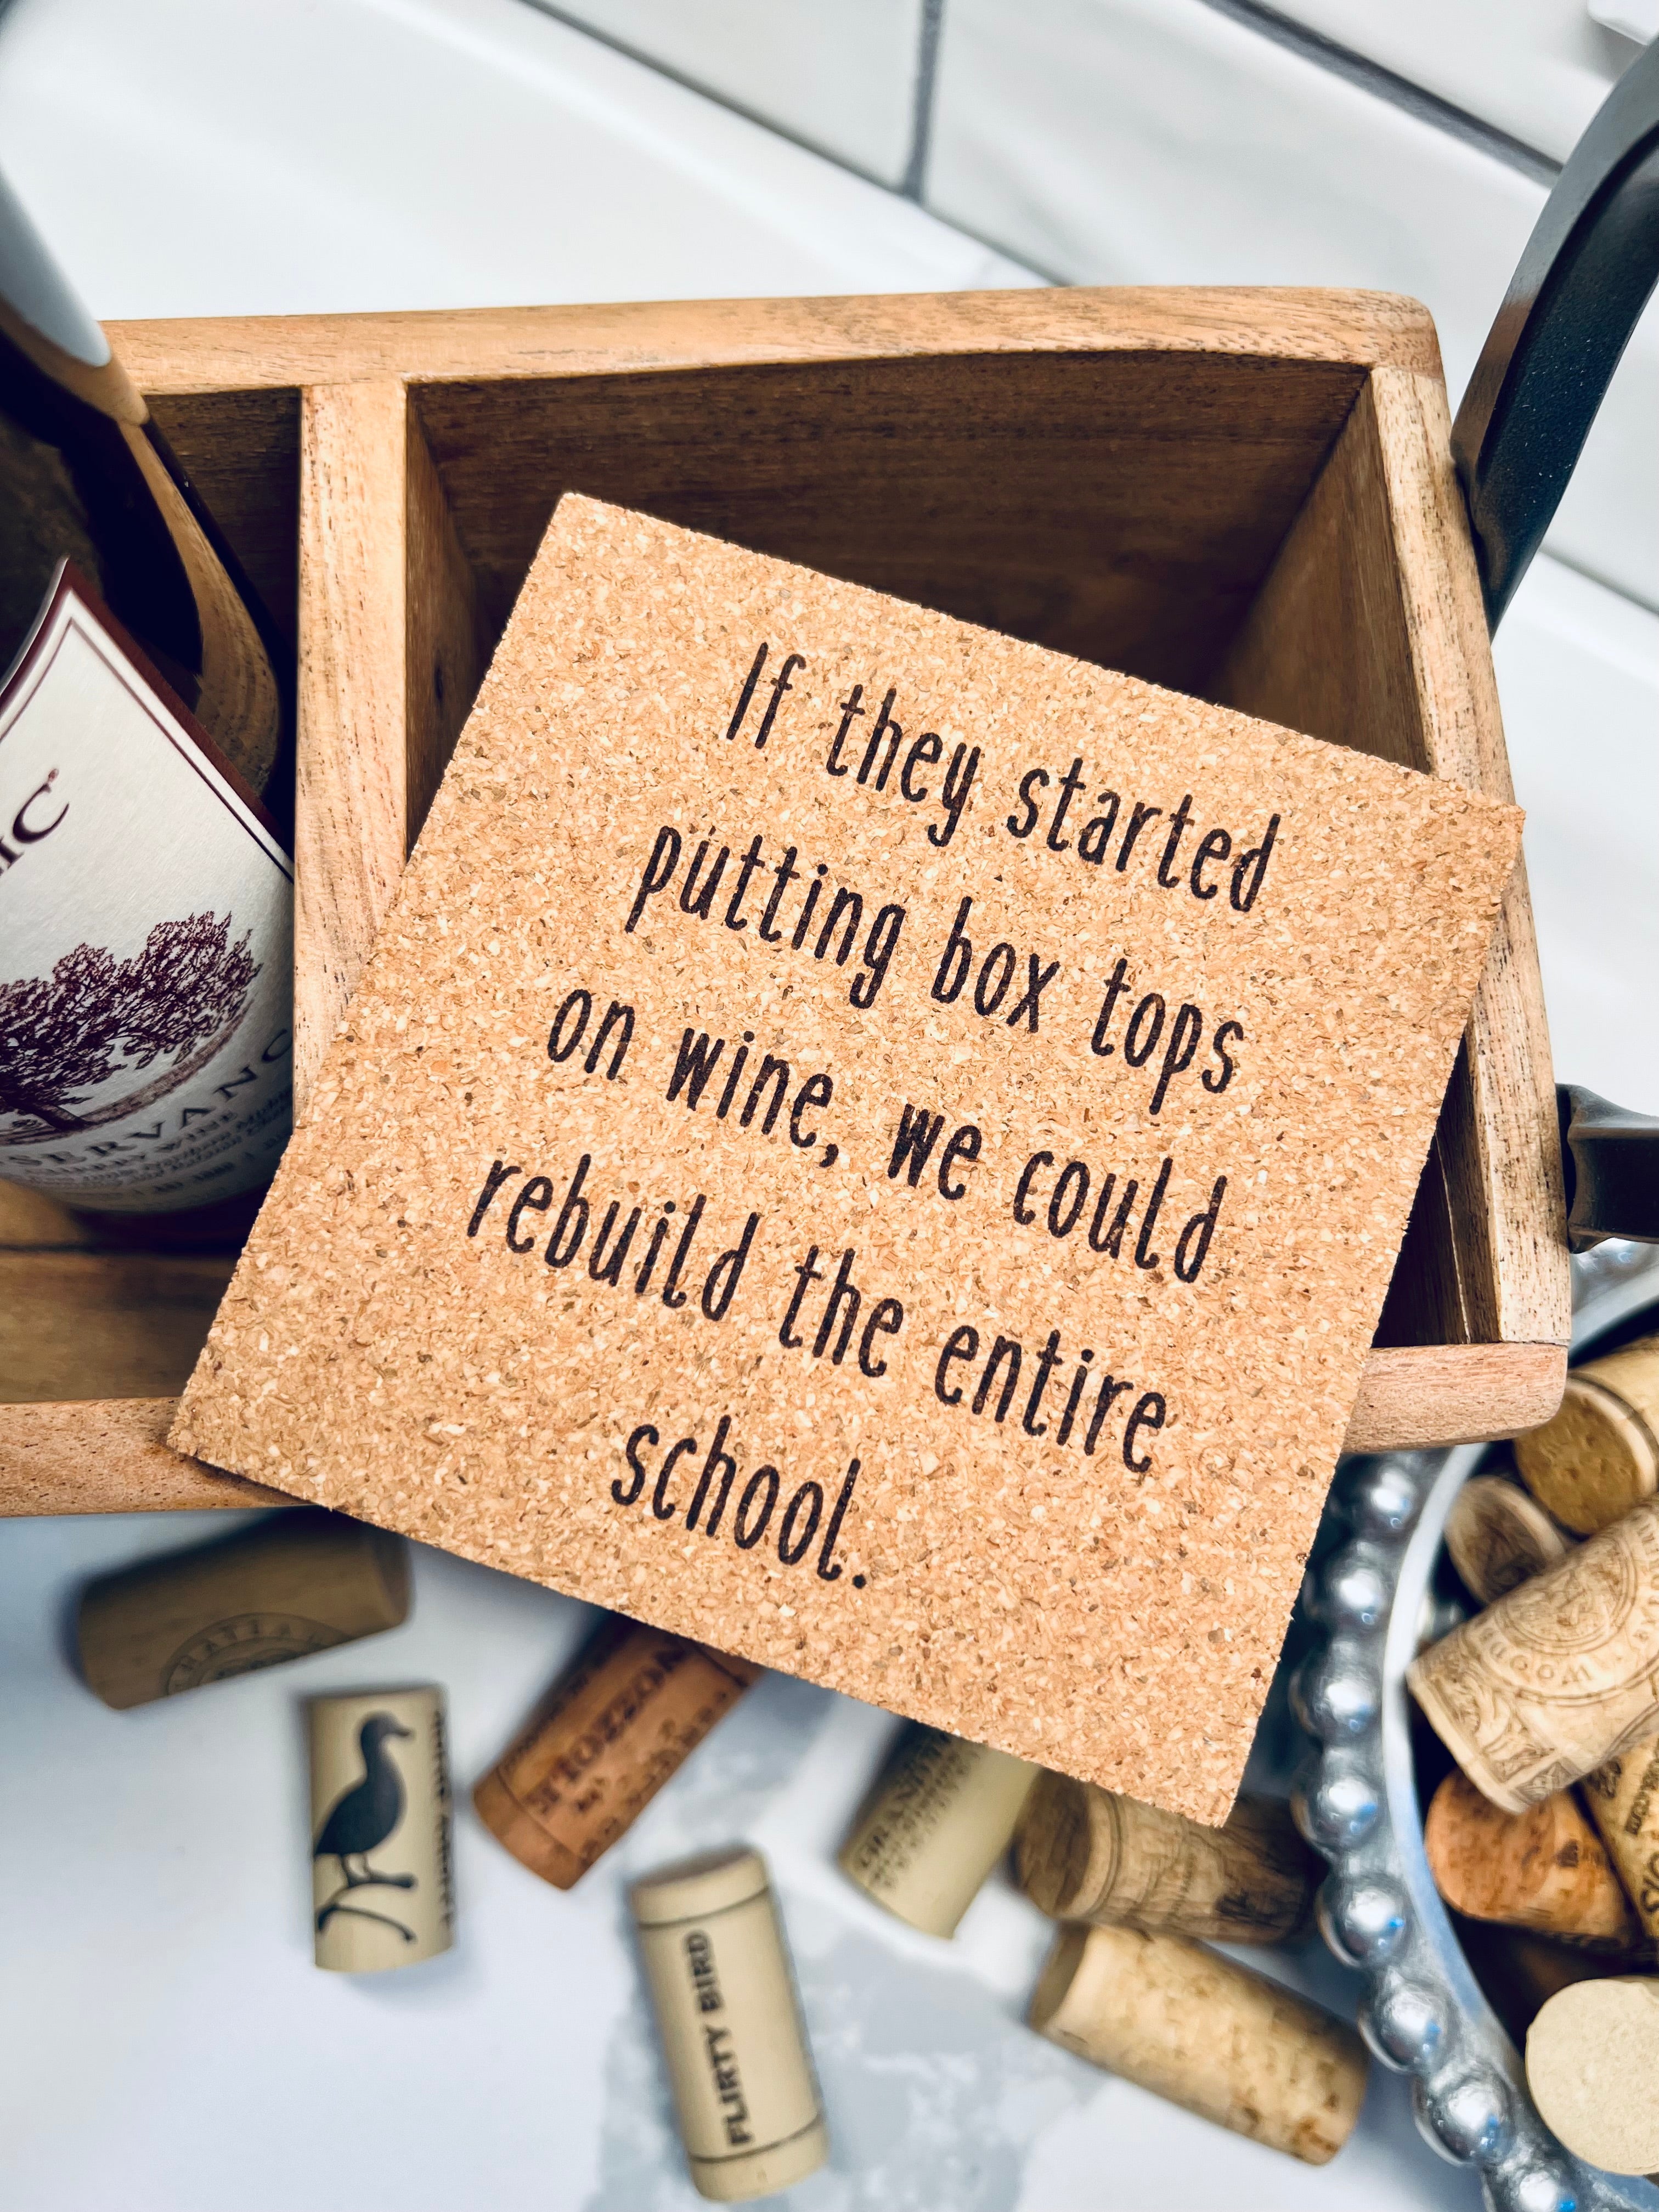 If they started putting box tops on wine, we could rebuild the entire school Cork Coaster